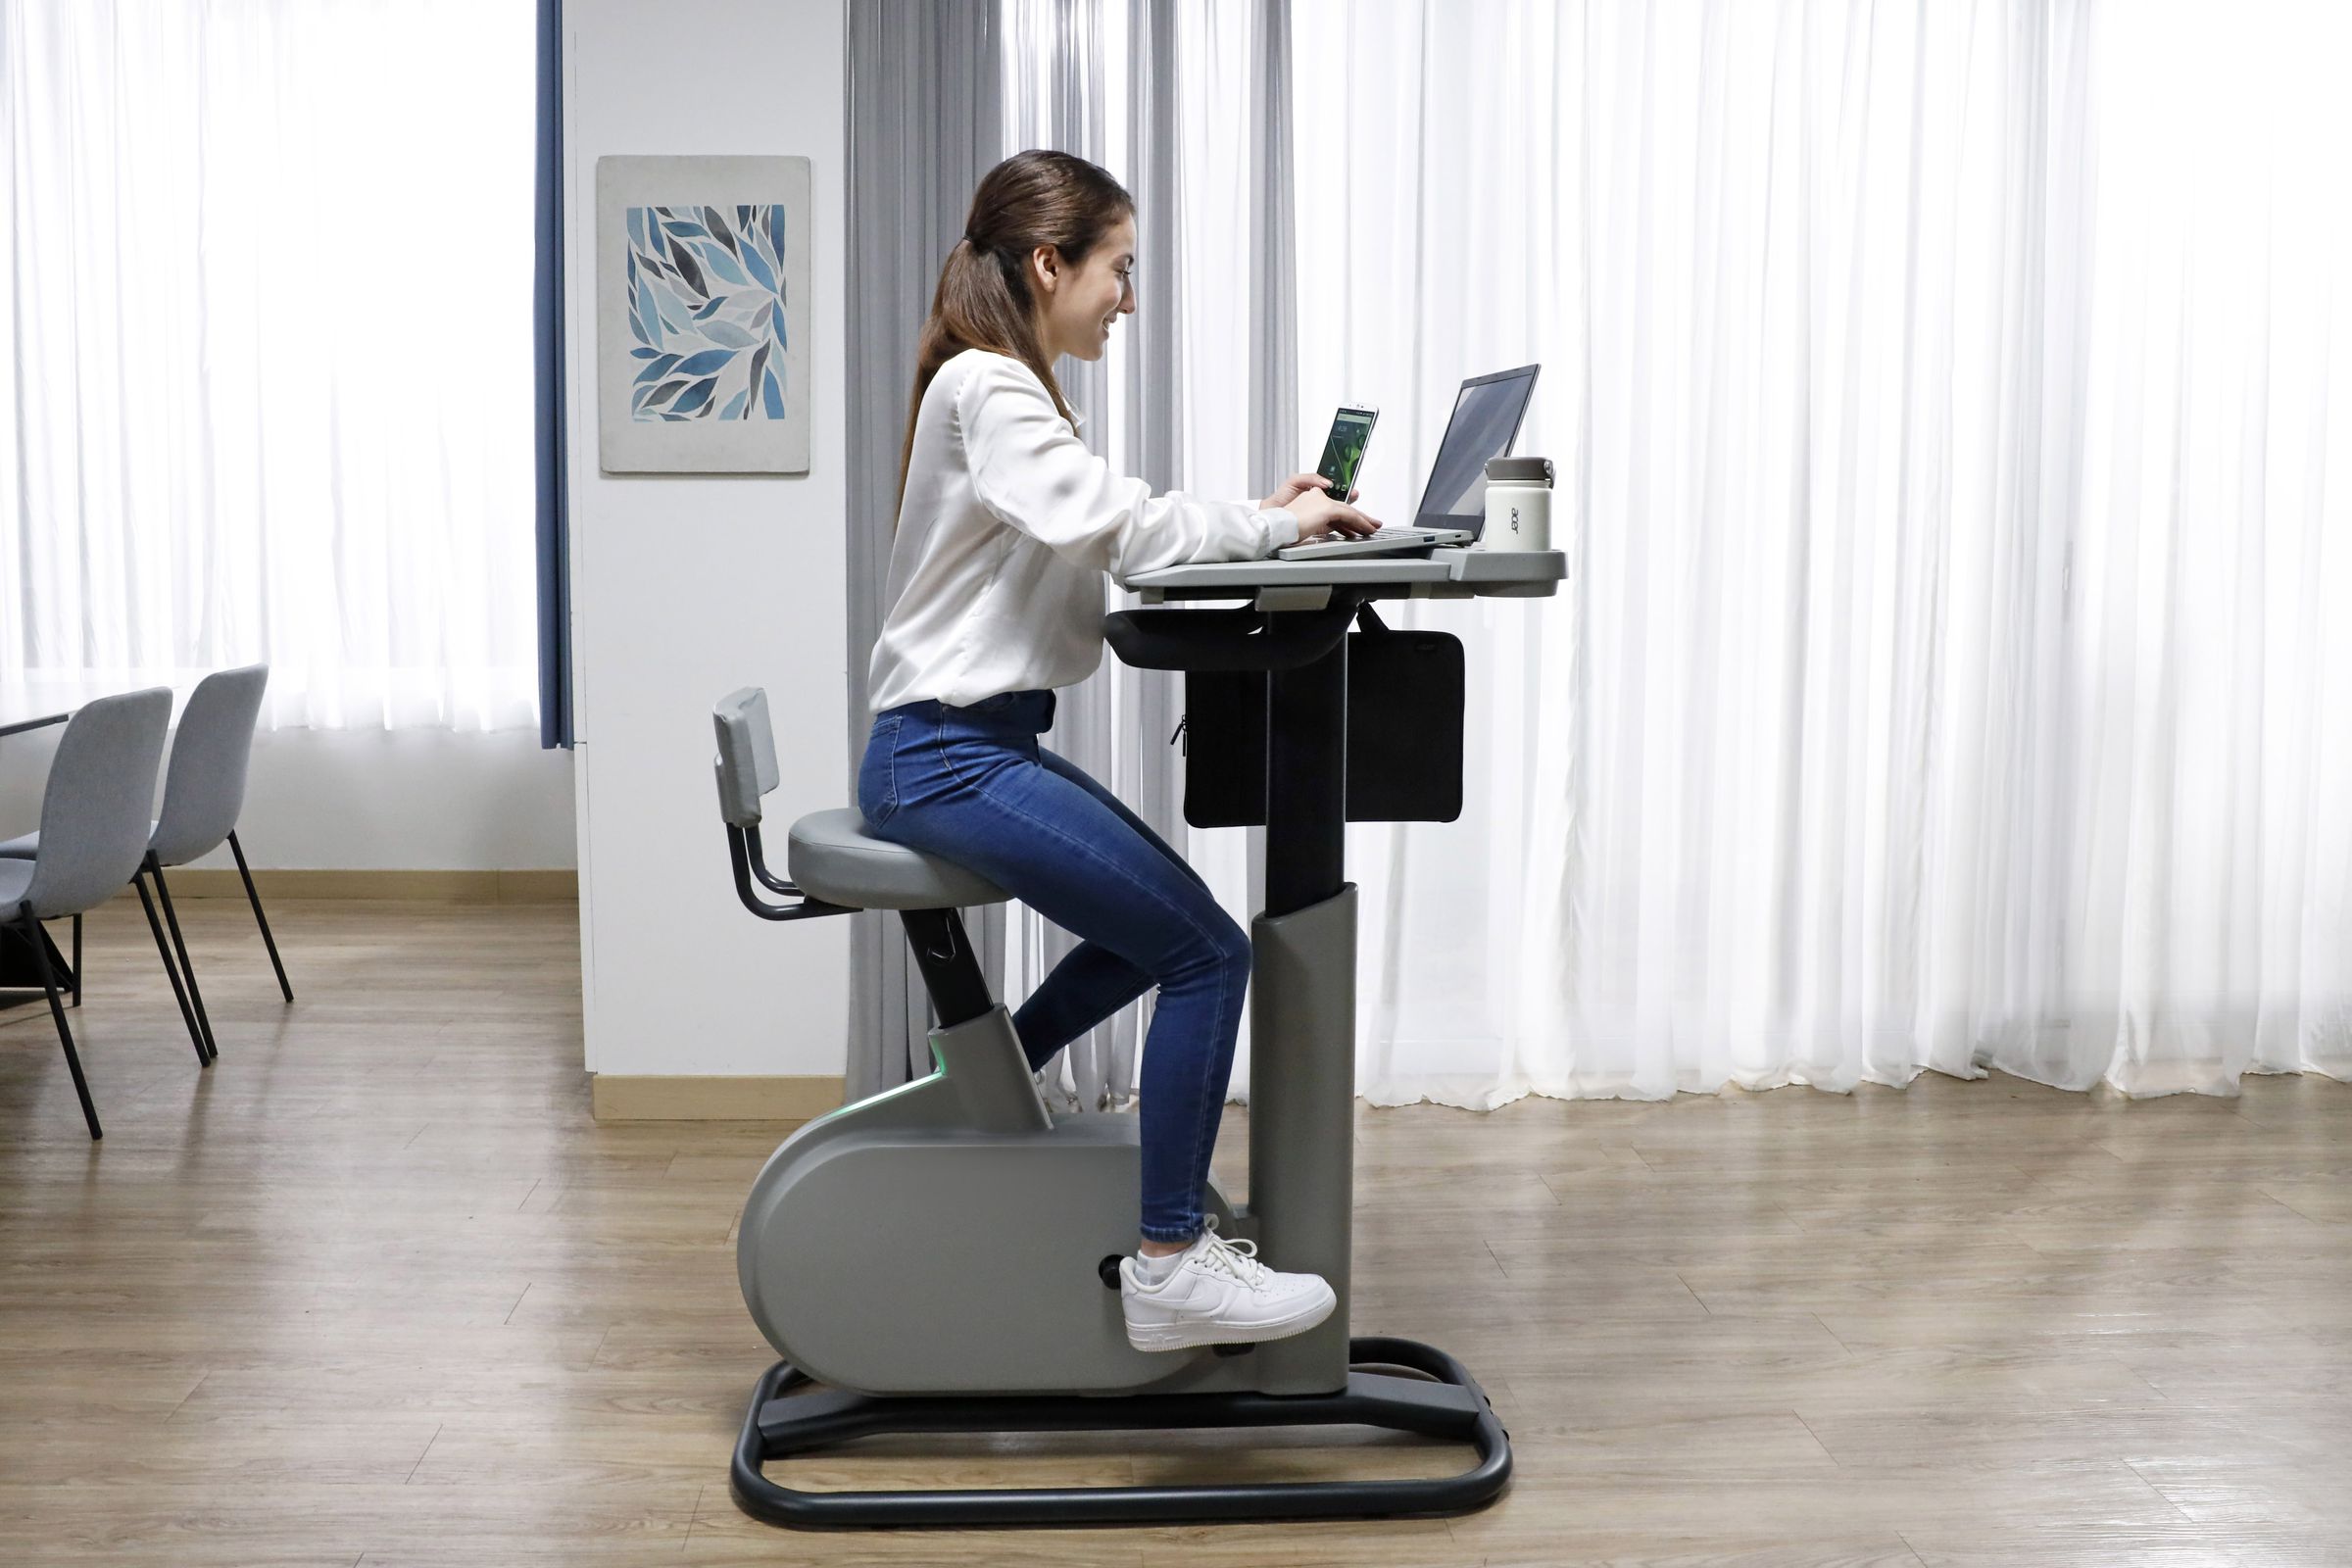 Acer’s eKinekt BD 3 bicycle meets desk is shown from the side, with a user working on it as they pedal.